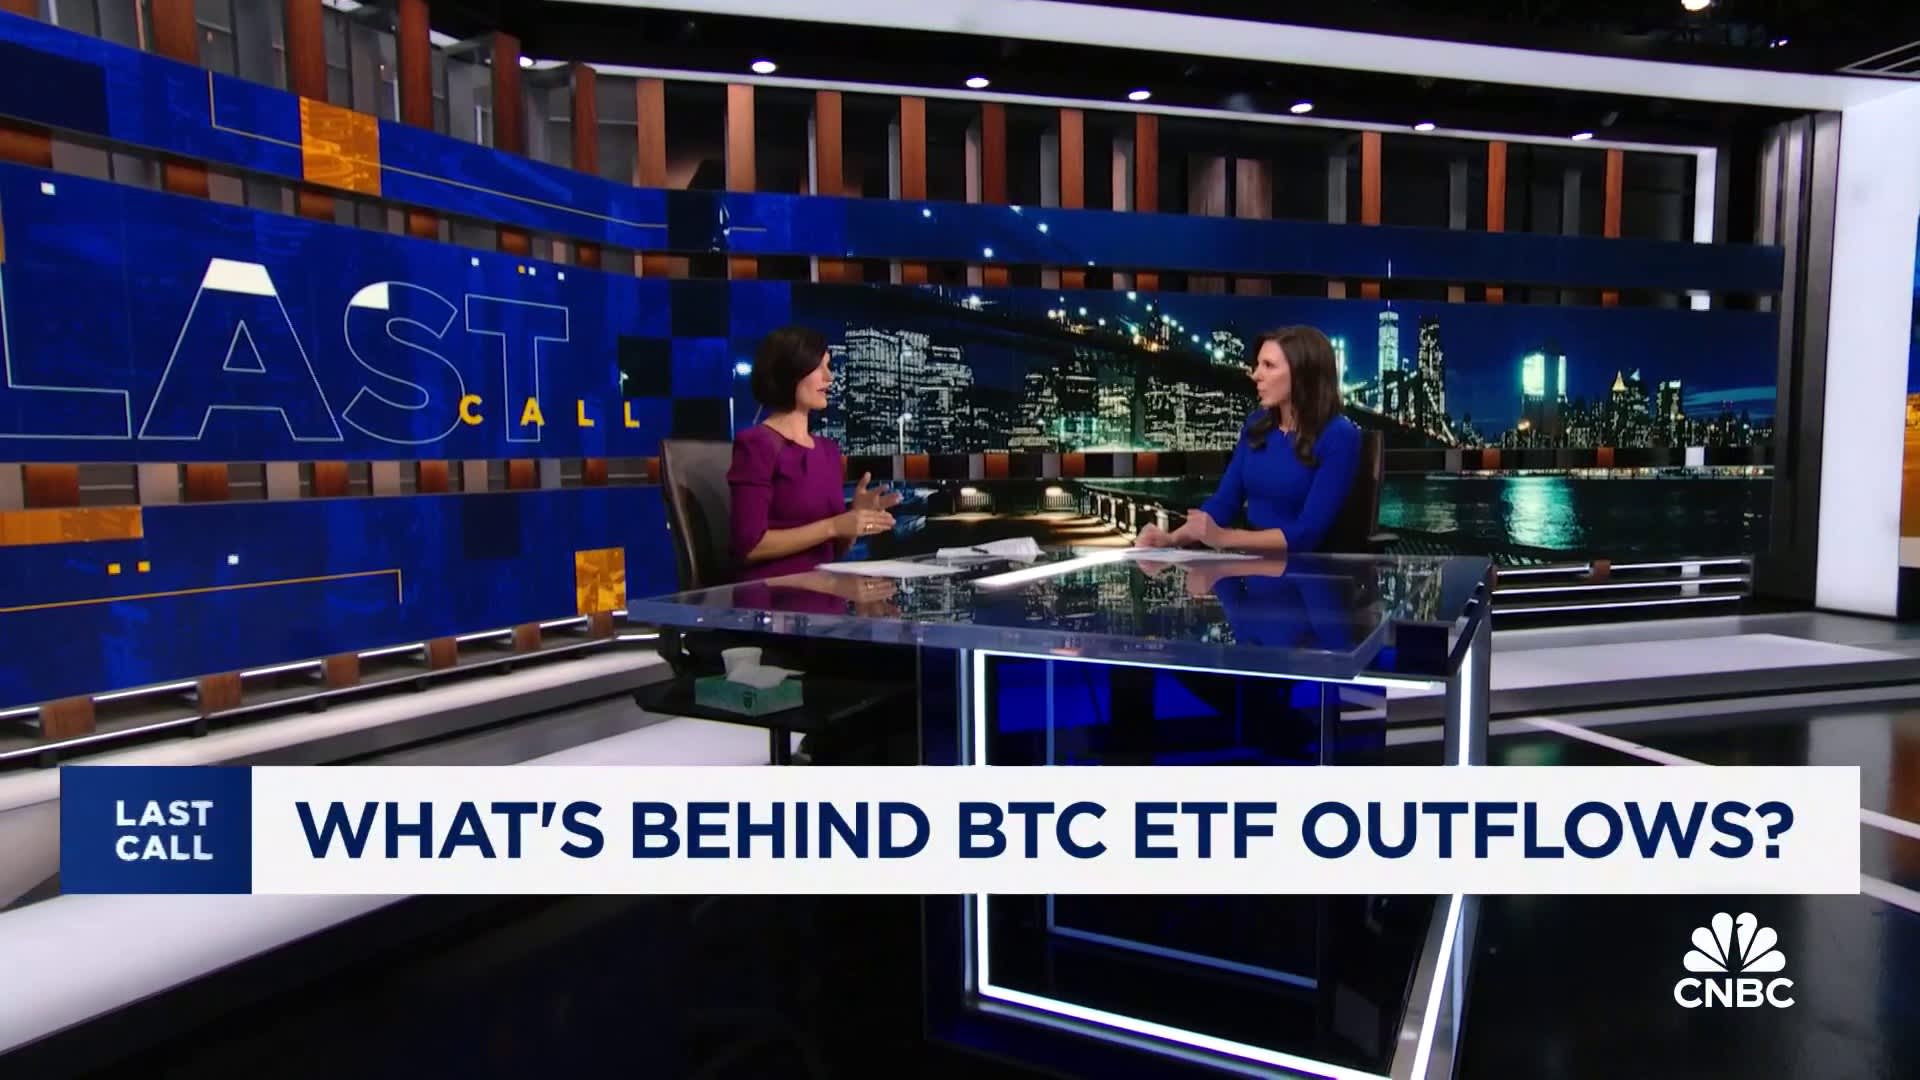 What's behind bitcoin's volatility and ETF outflows?